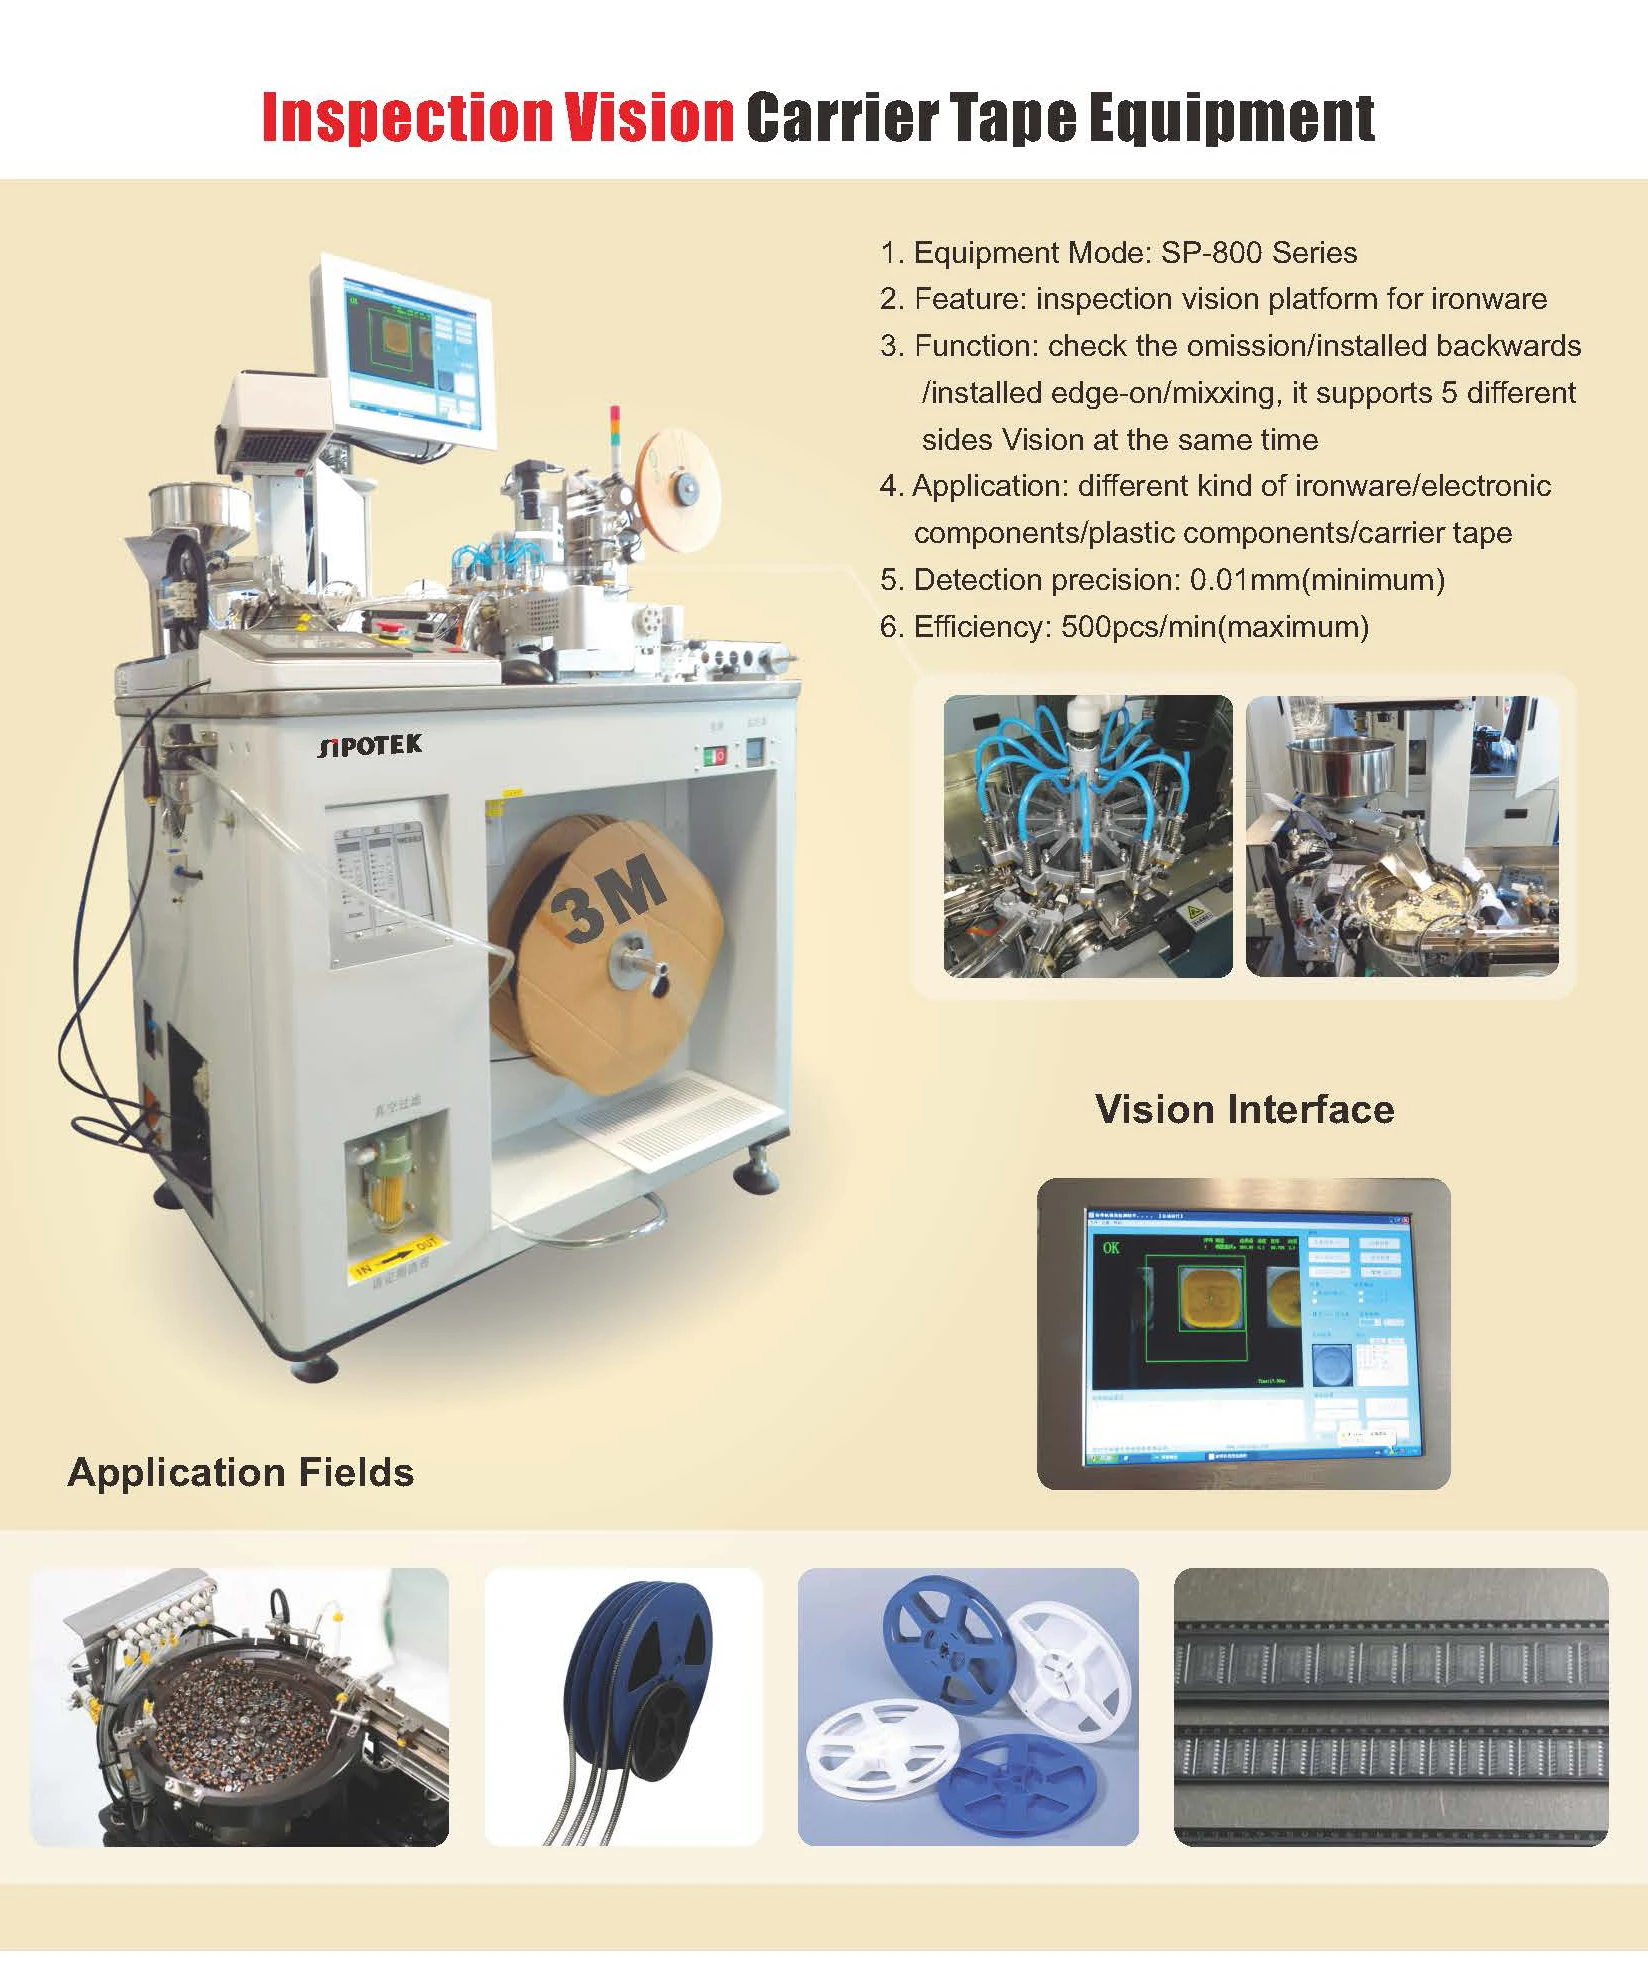 Professional Hardware Visual Inspection Machine For Detecting Missing Loading By Optical Sorting Equipment